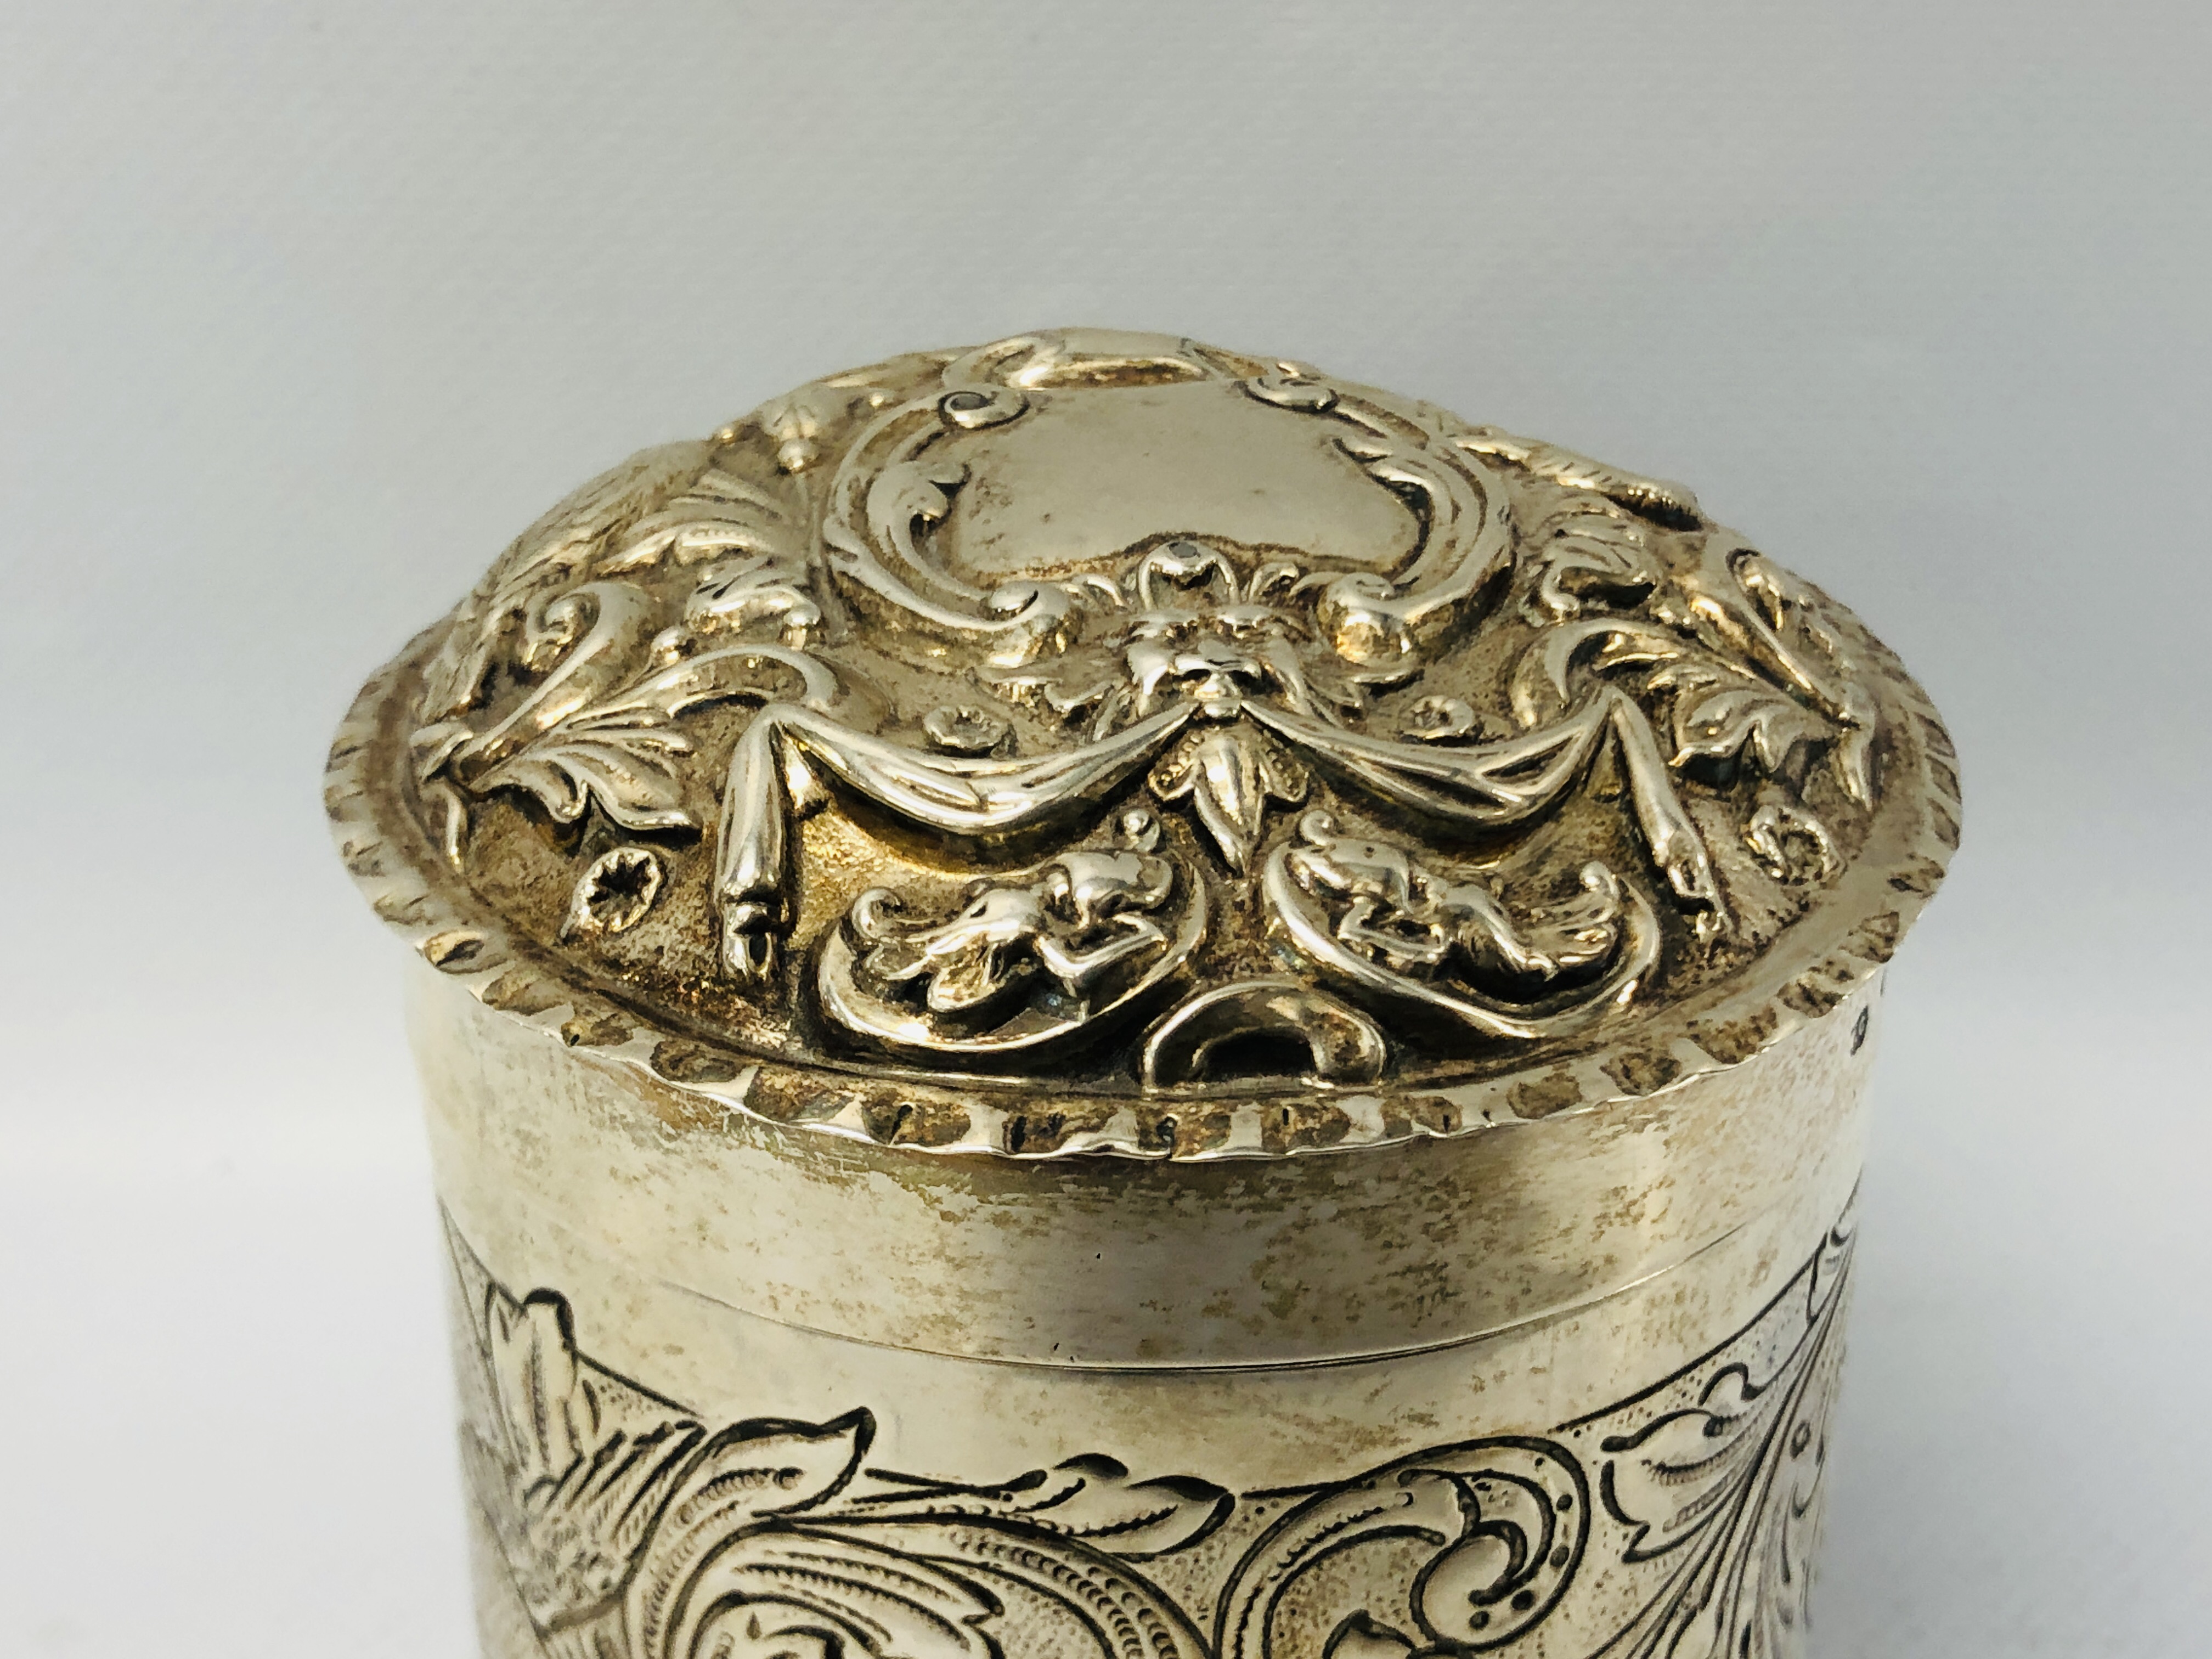 A VICTORIAN SILVER CYLINDRICAL BOX AND COVER DECORATED WITH BIRD LONDON 1888, WILLIAM COMINS - H 8. - Image 16 of 21